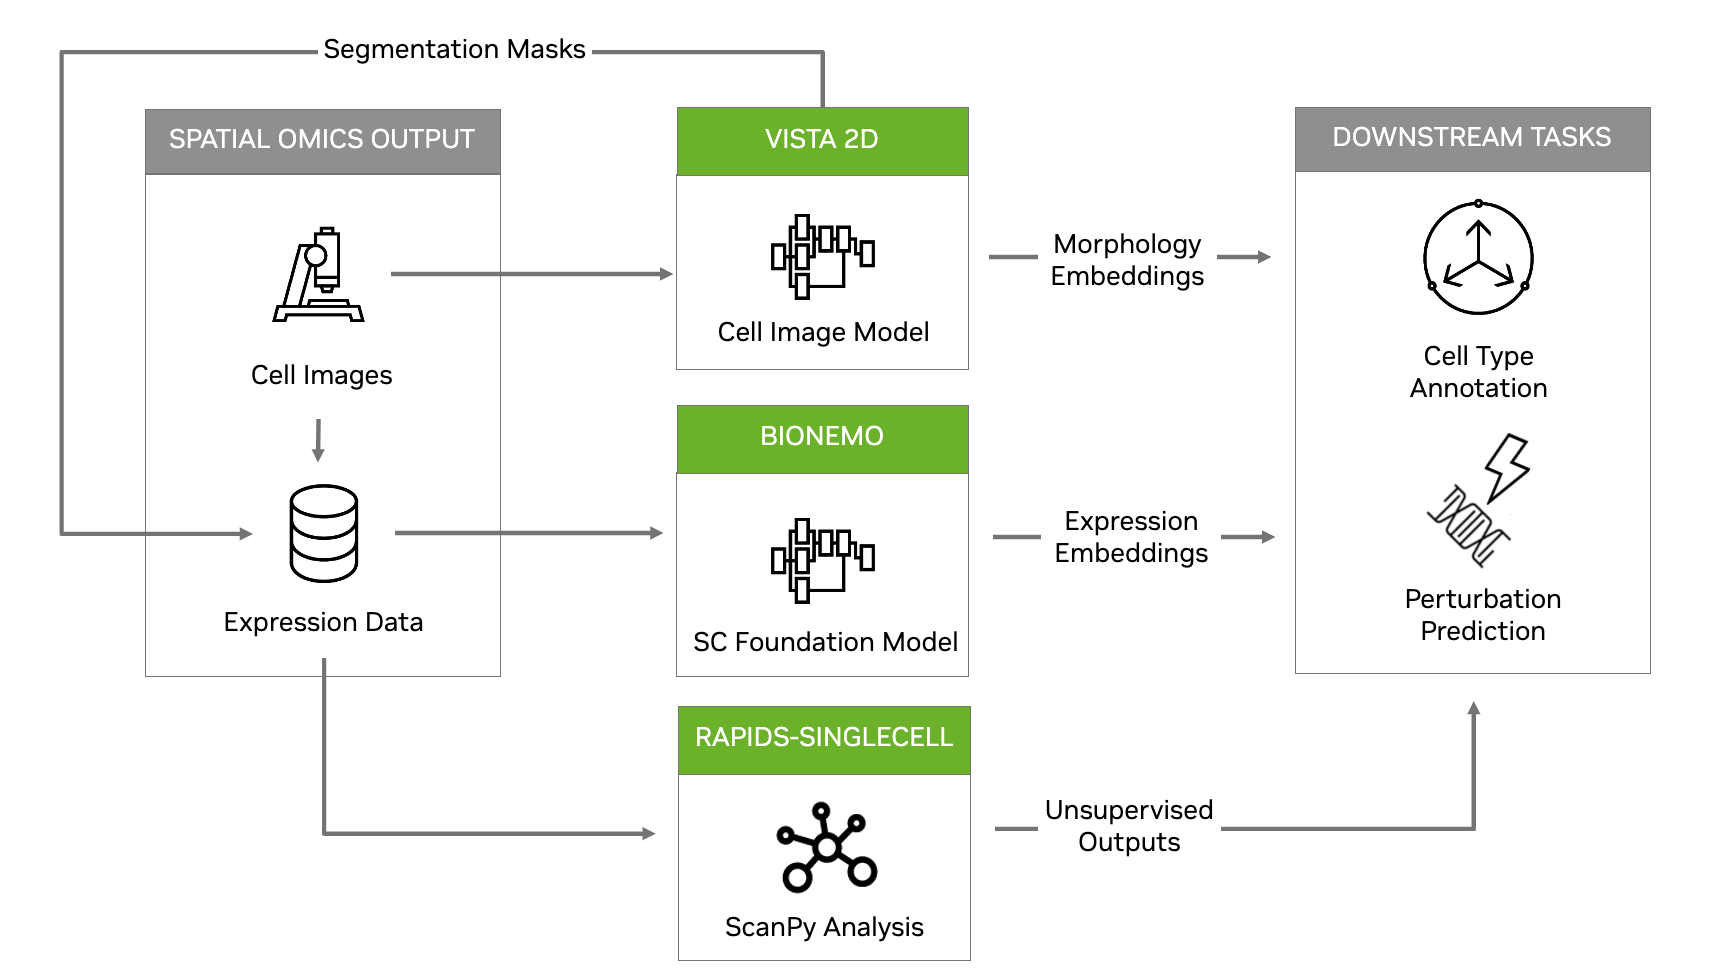 An overview of the spatial omics reference workflow, utilizing Vista 2D, BioNeMo, and RAPIDS Single Cell for downstream tasks such as cell type annotation and perturbation prediction